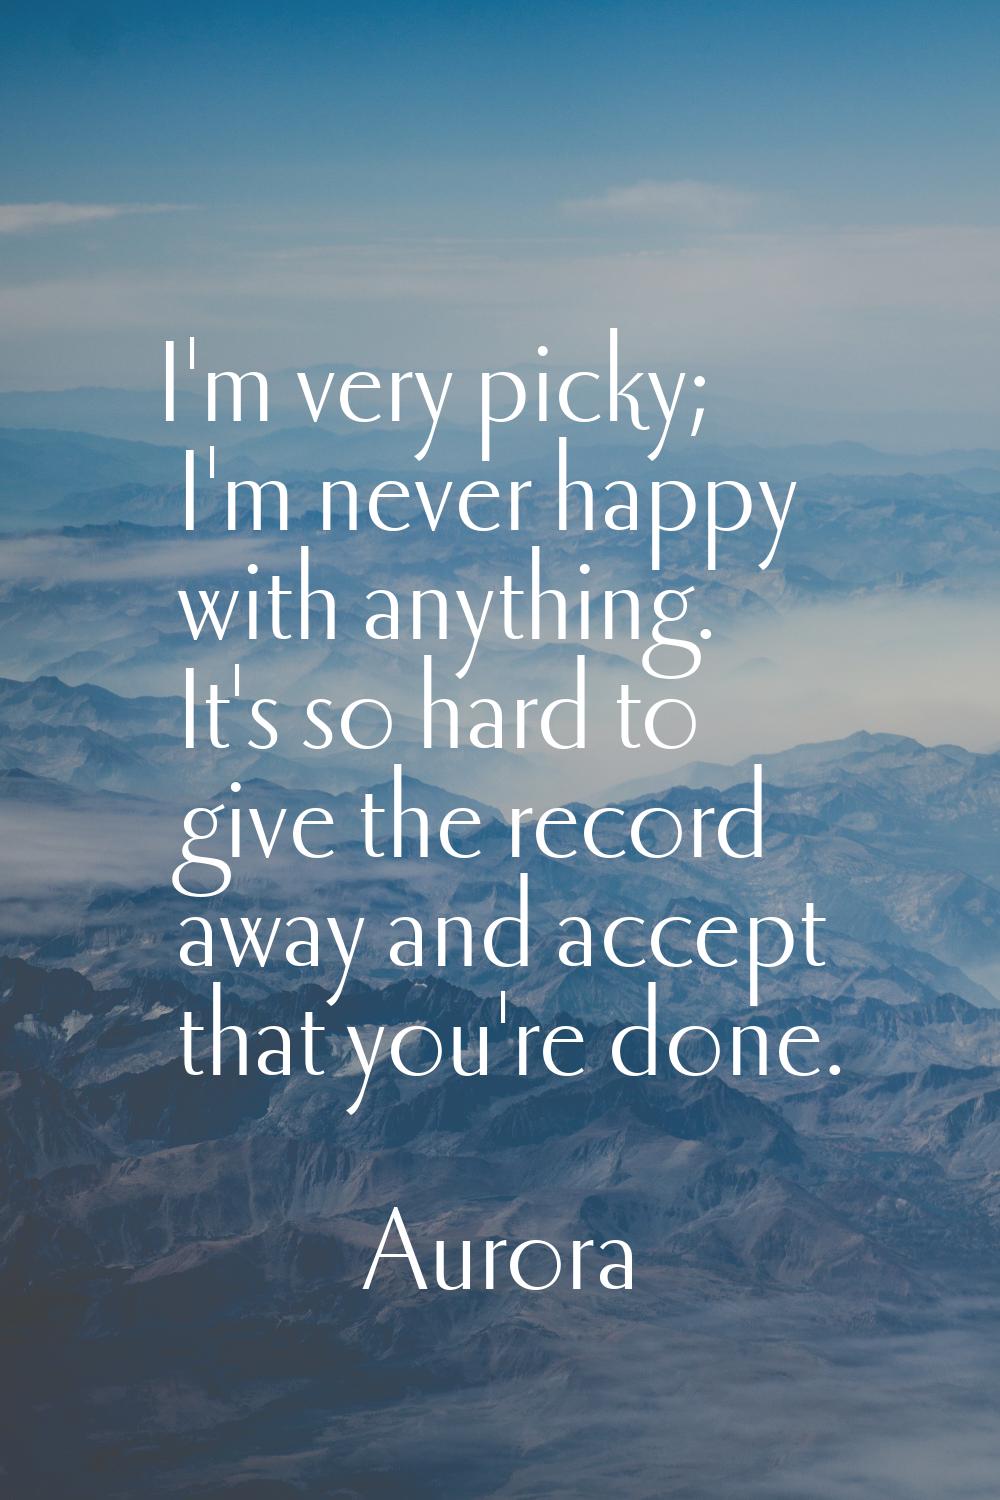 I'm very picky; I'm never happy with anything. It's so hard to give the record away and accept that